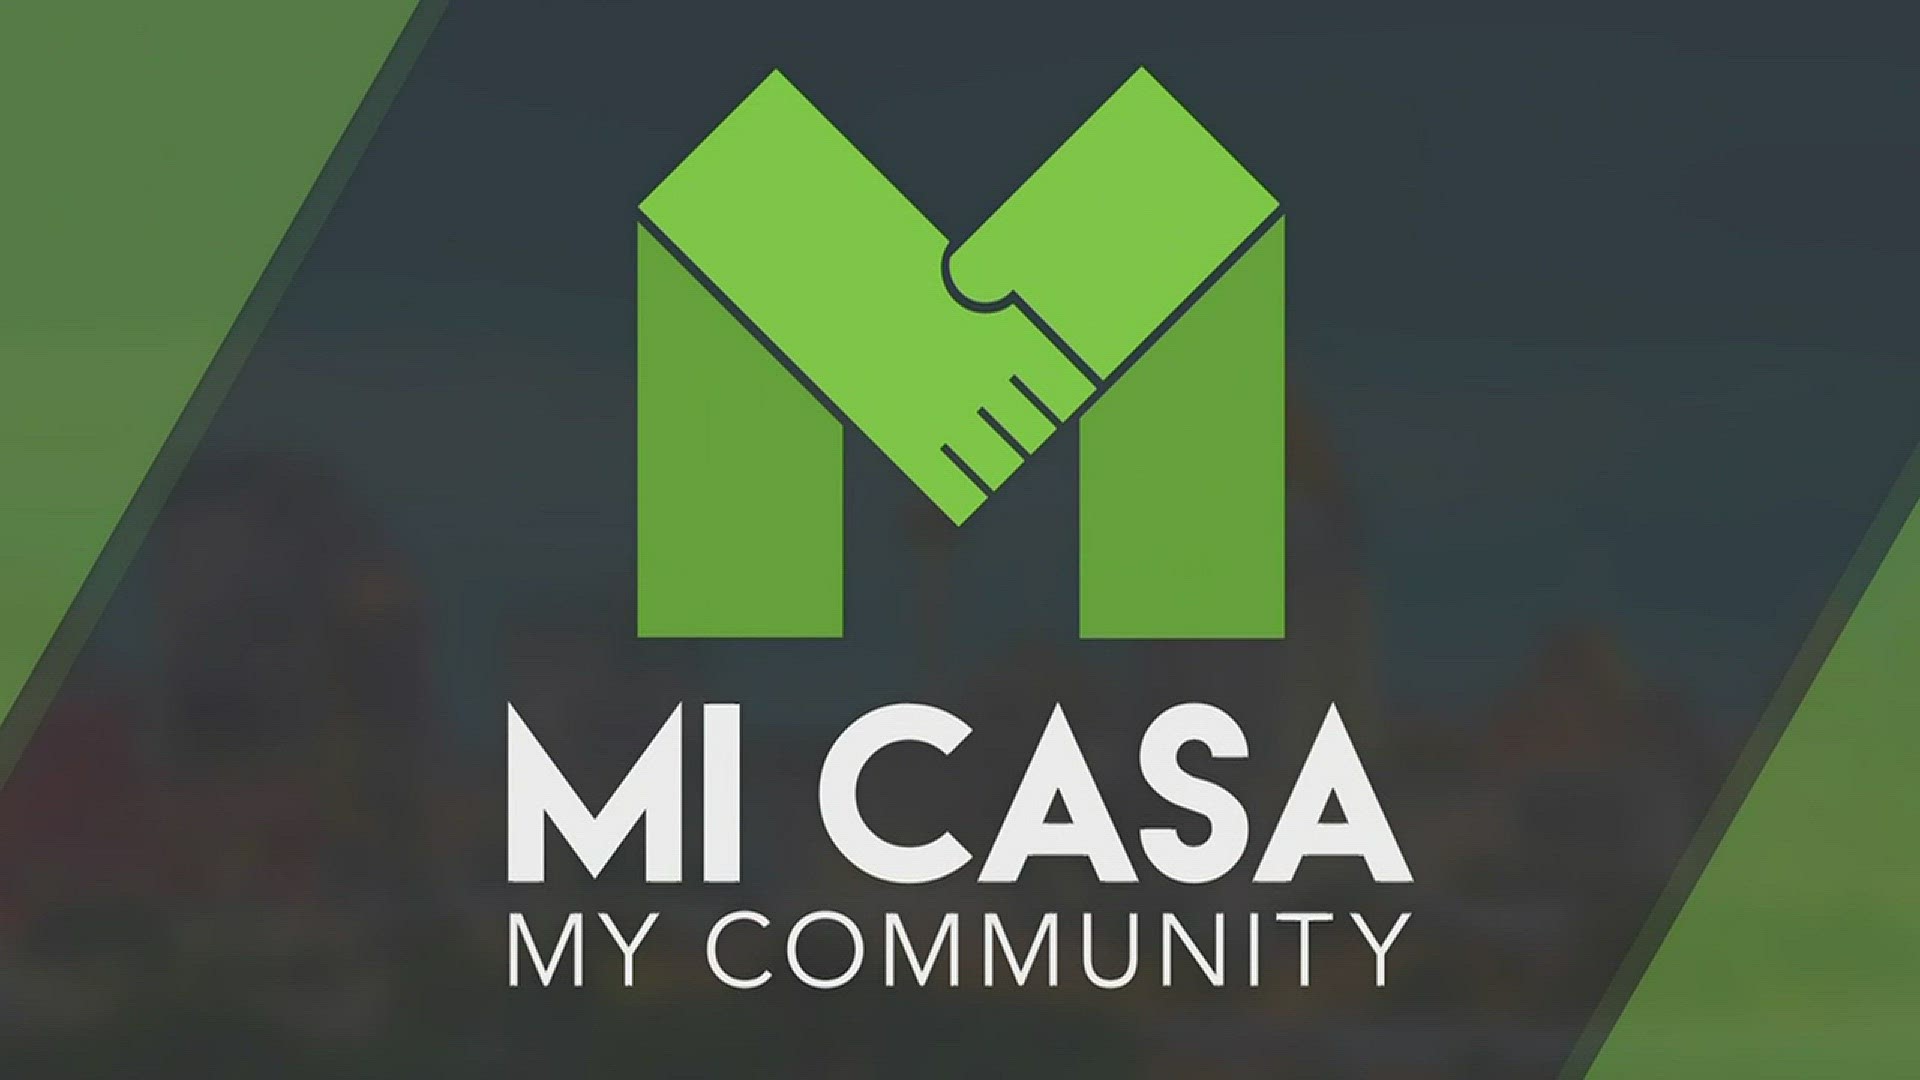 Find out how you can submit a nomination to become a Mi Casa ' My Community recipient.